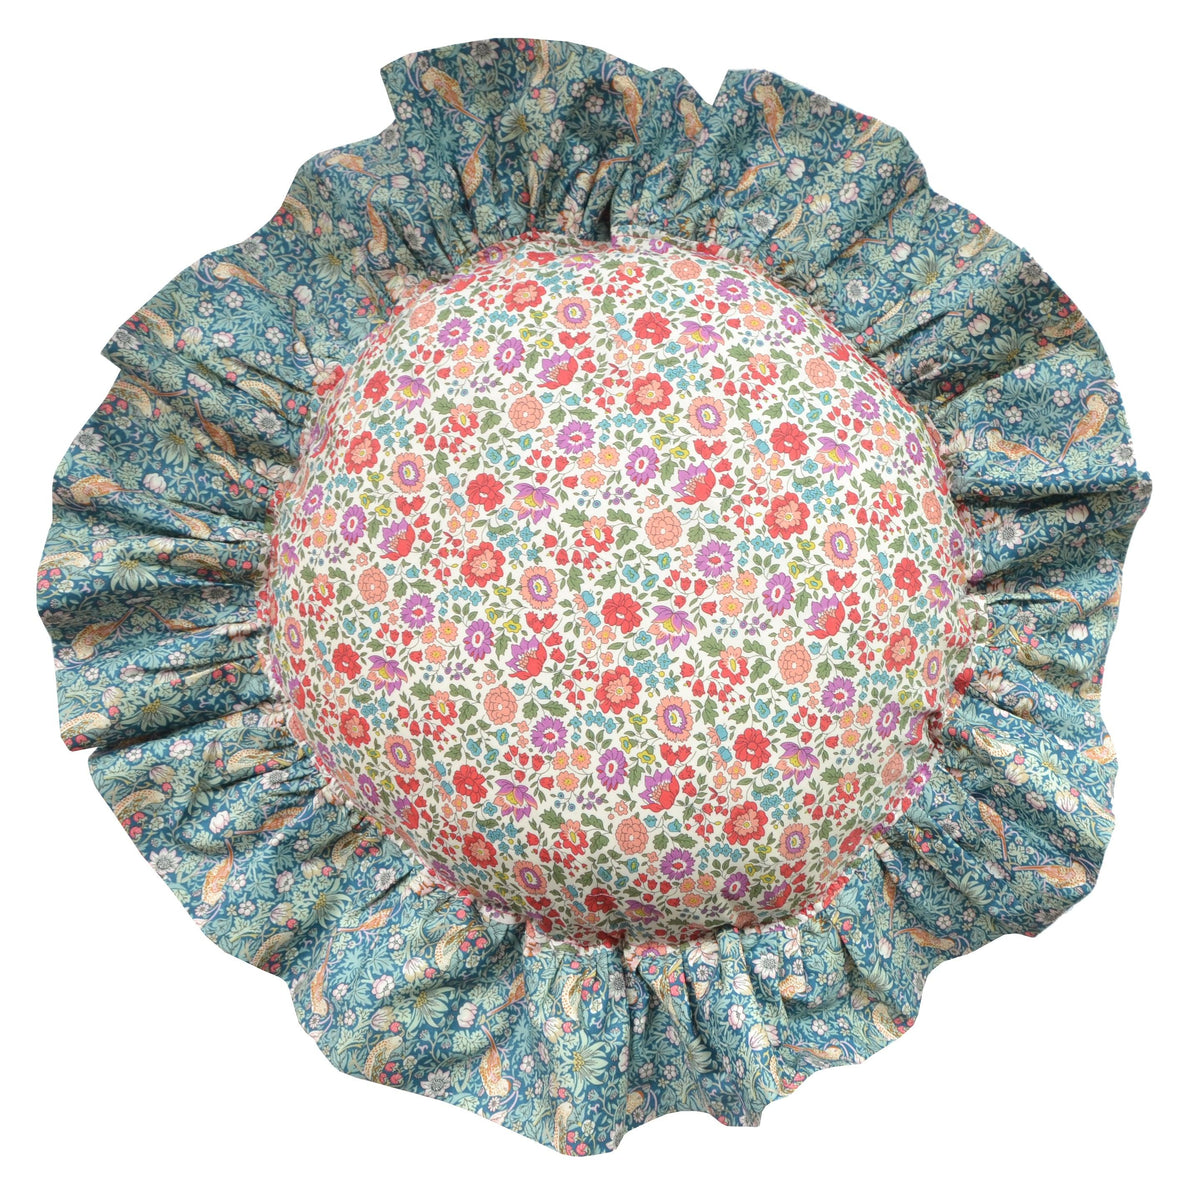 Round Ruffle Cushion made with Liberty Fabric STRAWBERRY THIEF & D'ANJO - Coco & Wolf